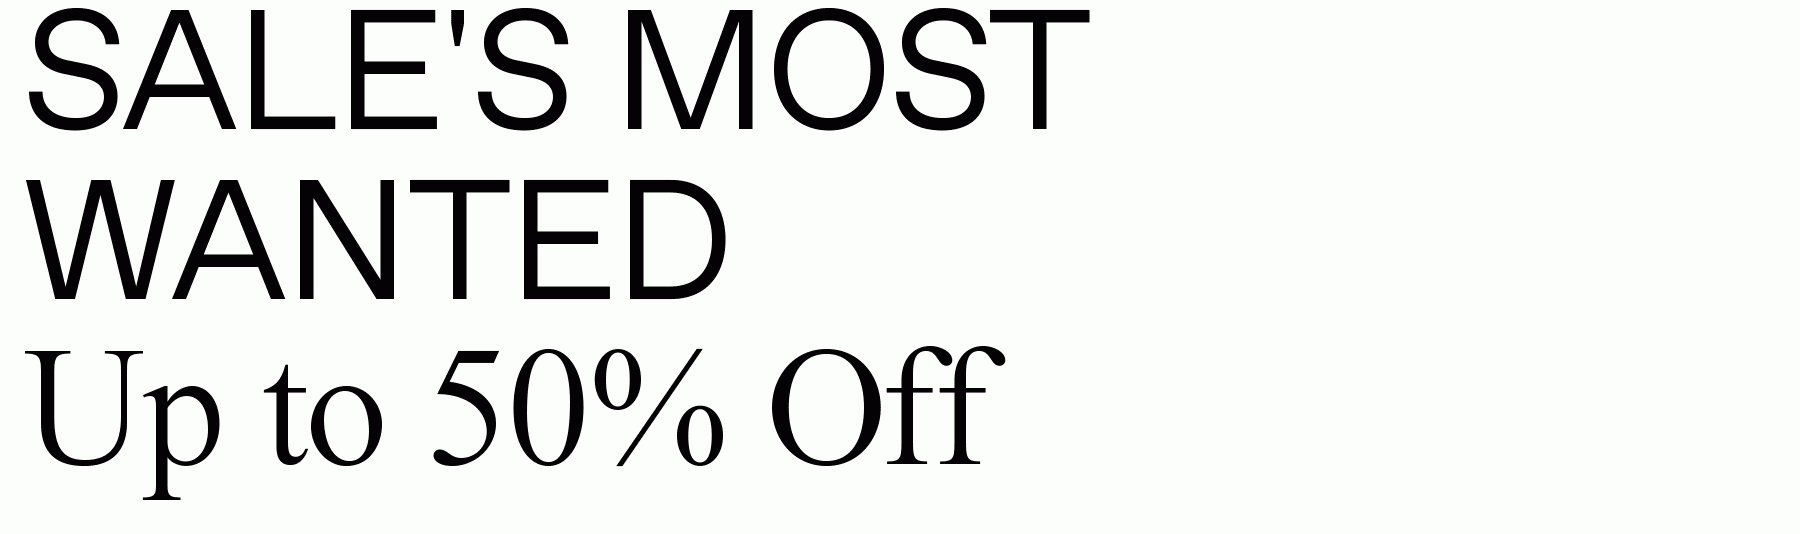 Sale's Most Wanted: Up to 50% Off, Further Markdowns